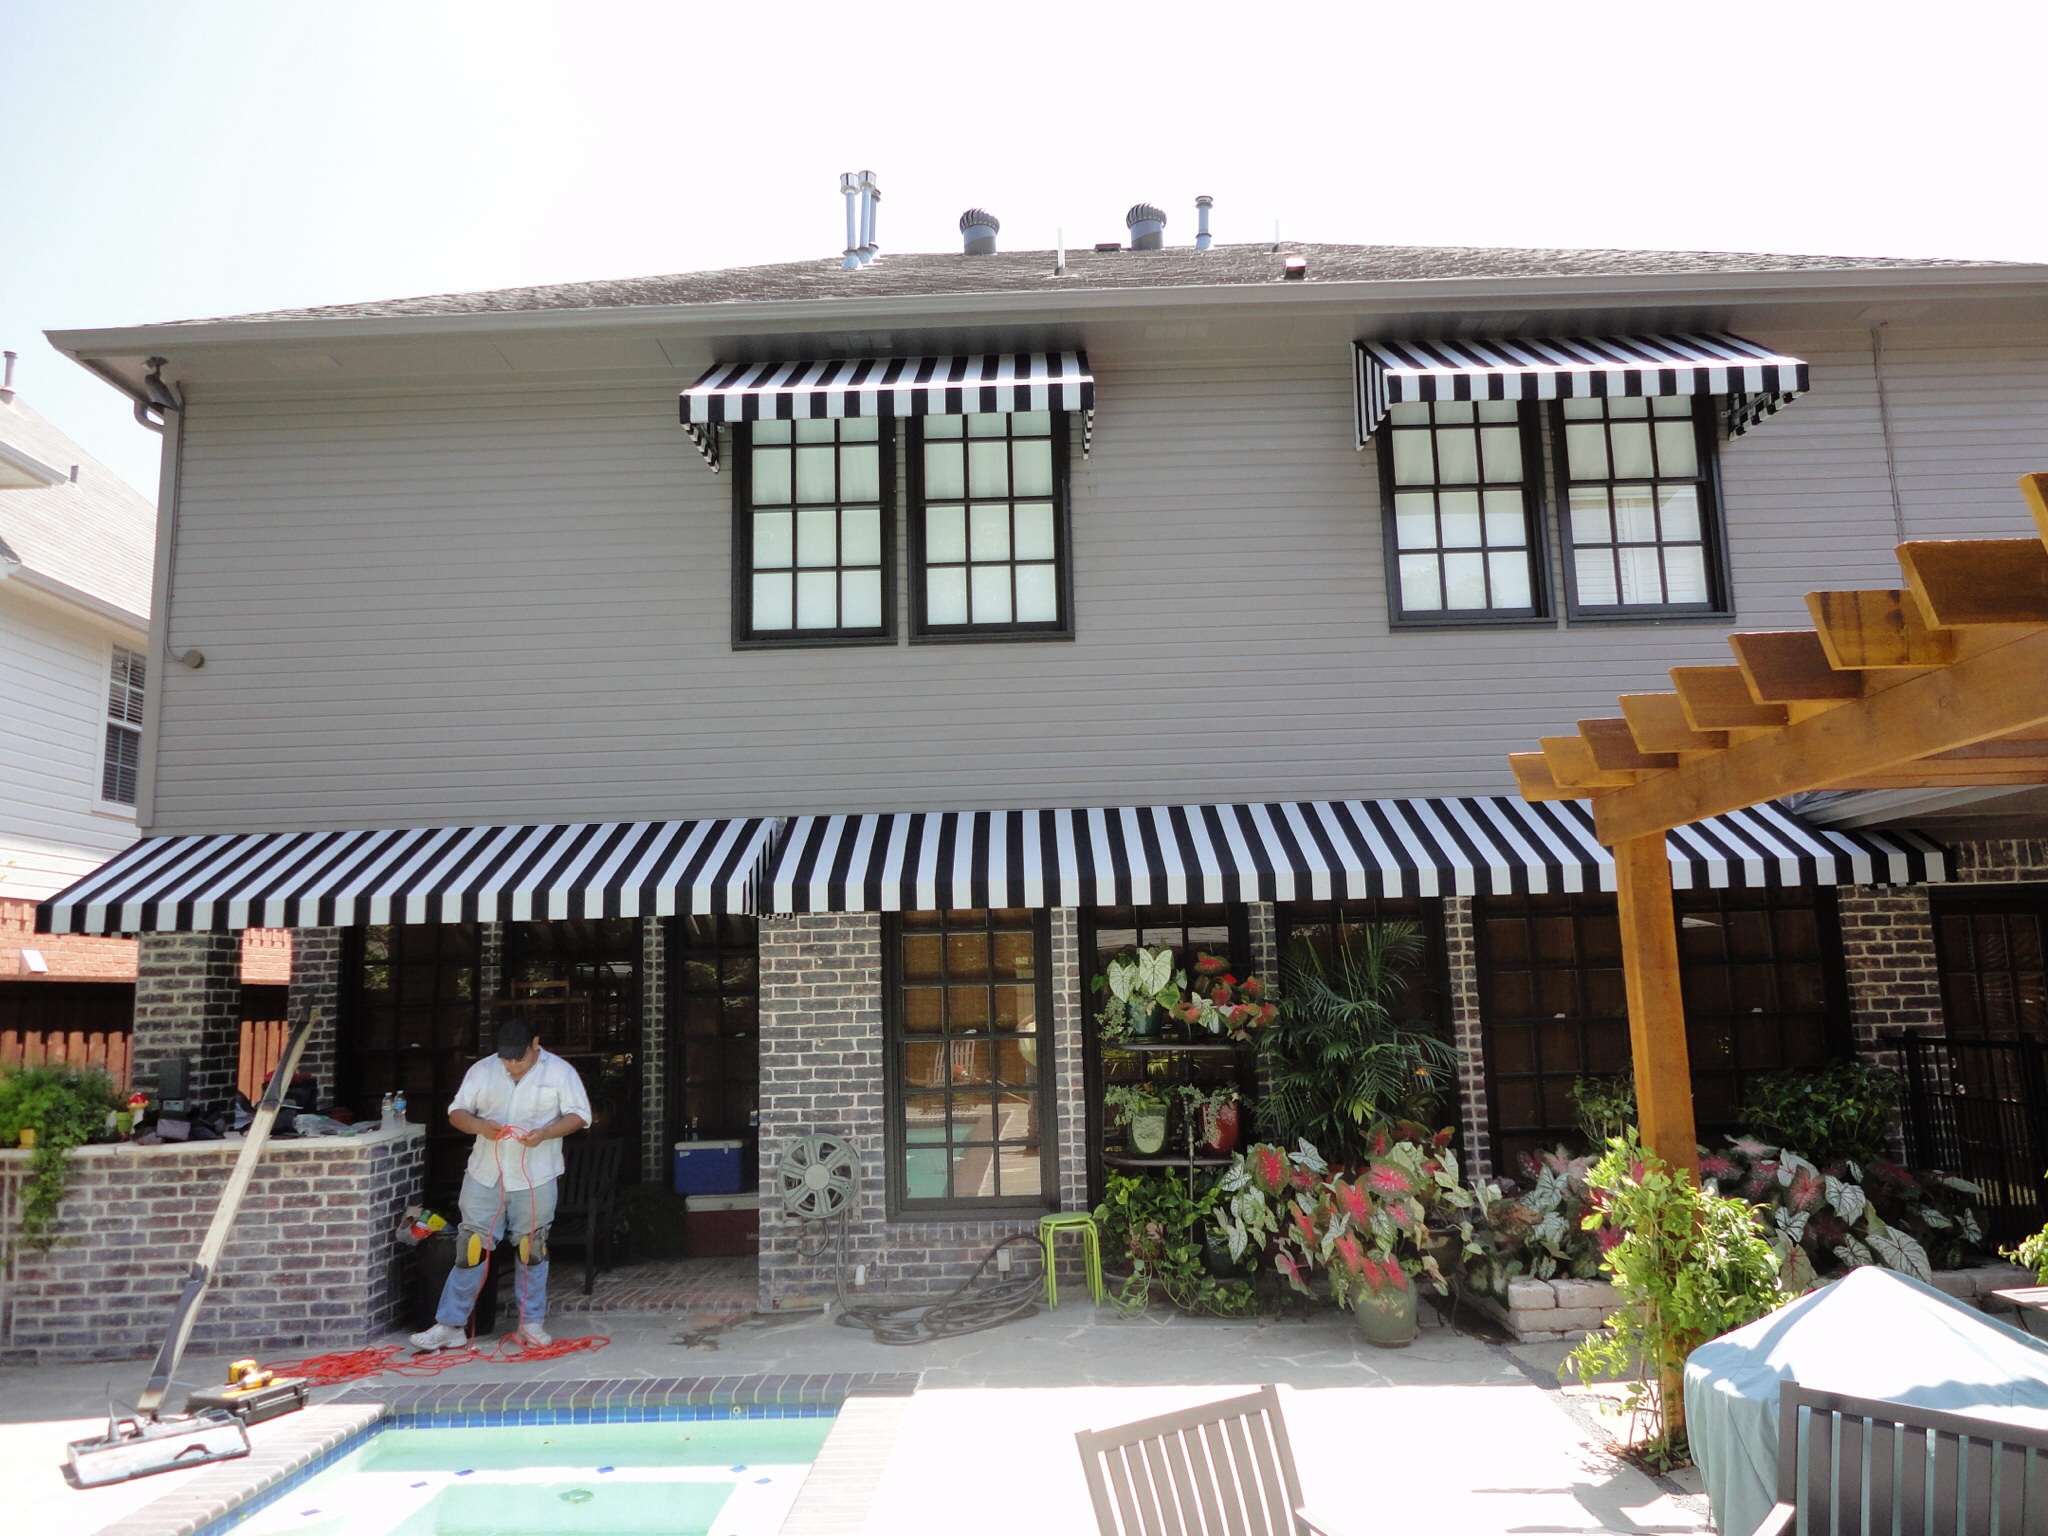 New Age Canvas Awning Dallas Residential Awning New Age Canvas And Awning Image Proview